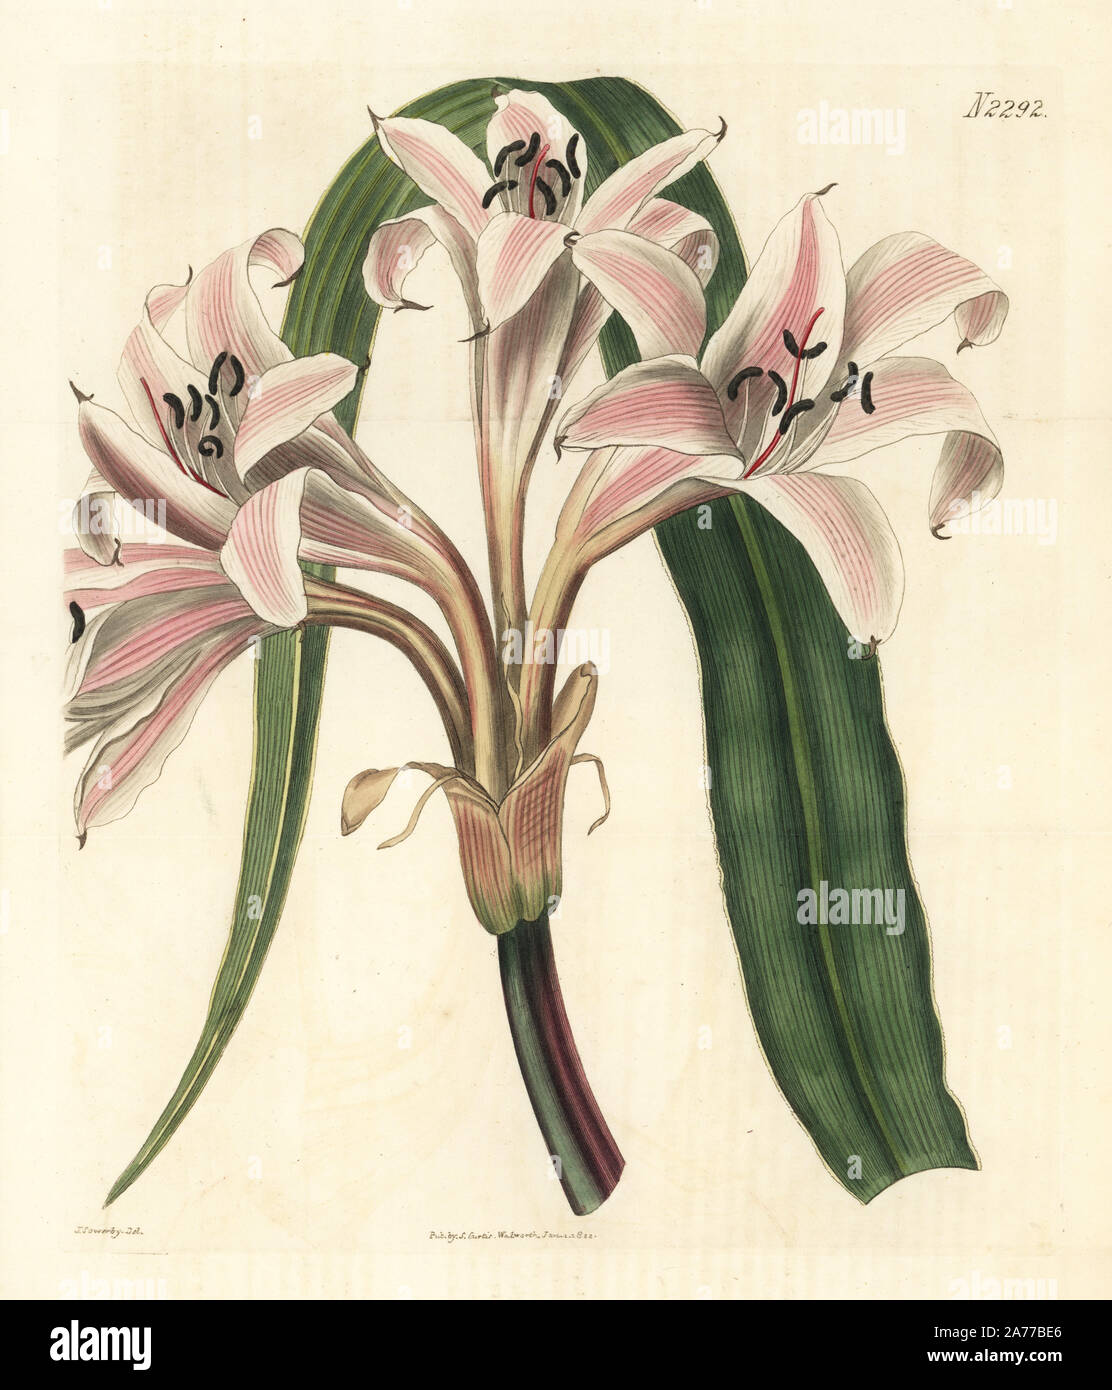 Pink striped trumpet lily, Crinum latifolium (Molucca crinum, Crinum moluccanum). Handcoloured copperplate engraving by Weddell after an illustration by James Sowerby from Samuel Curtis's 'Botanical Magazine,' London, 1822. Stock Photo